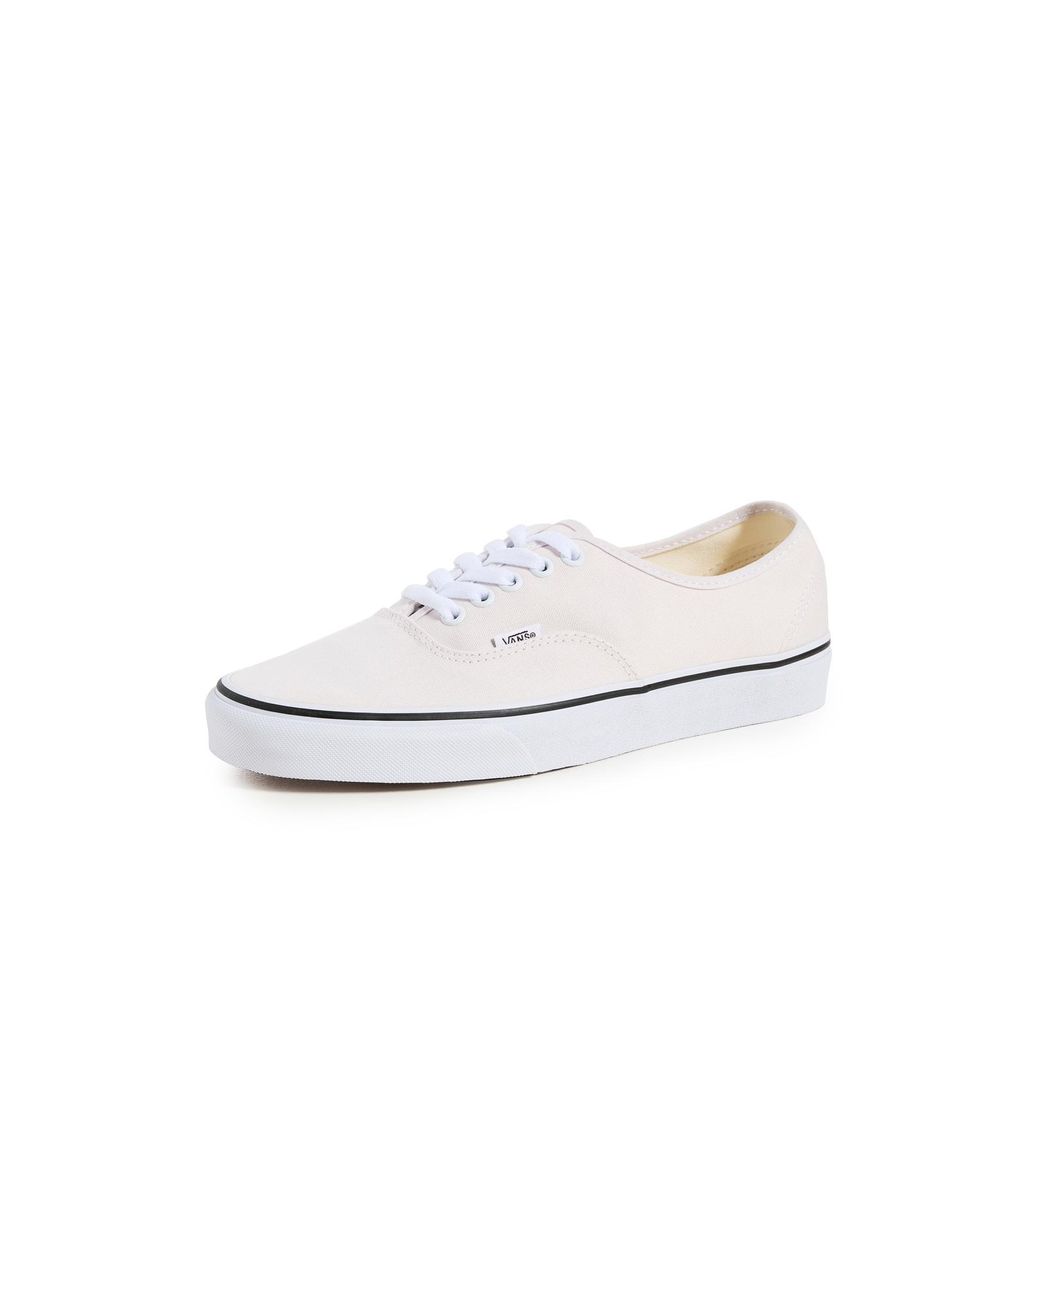 Vans Authentic Sneakers in White for Men | Lyst